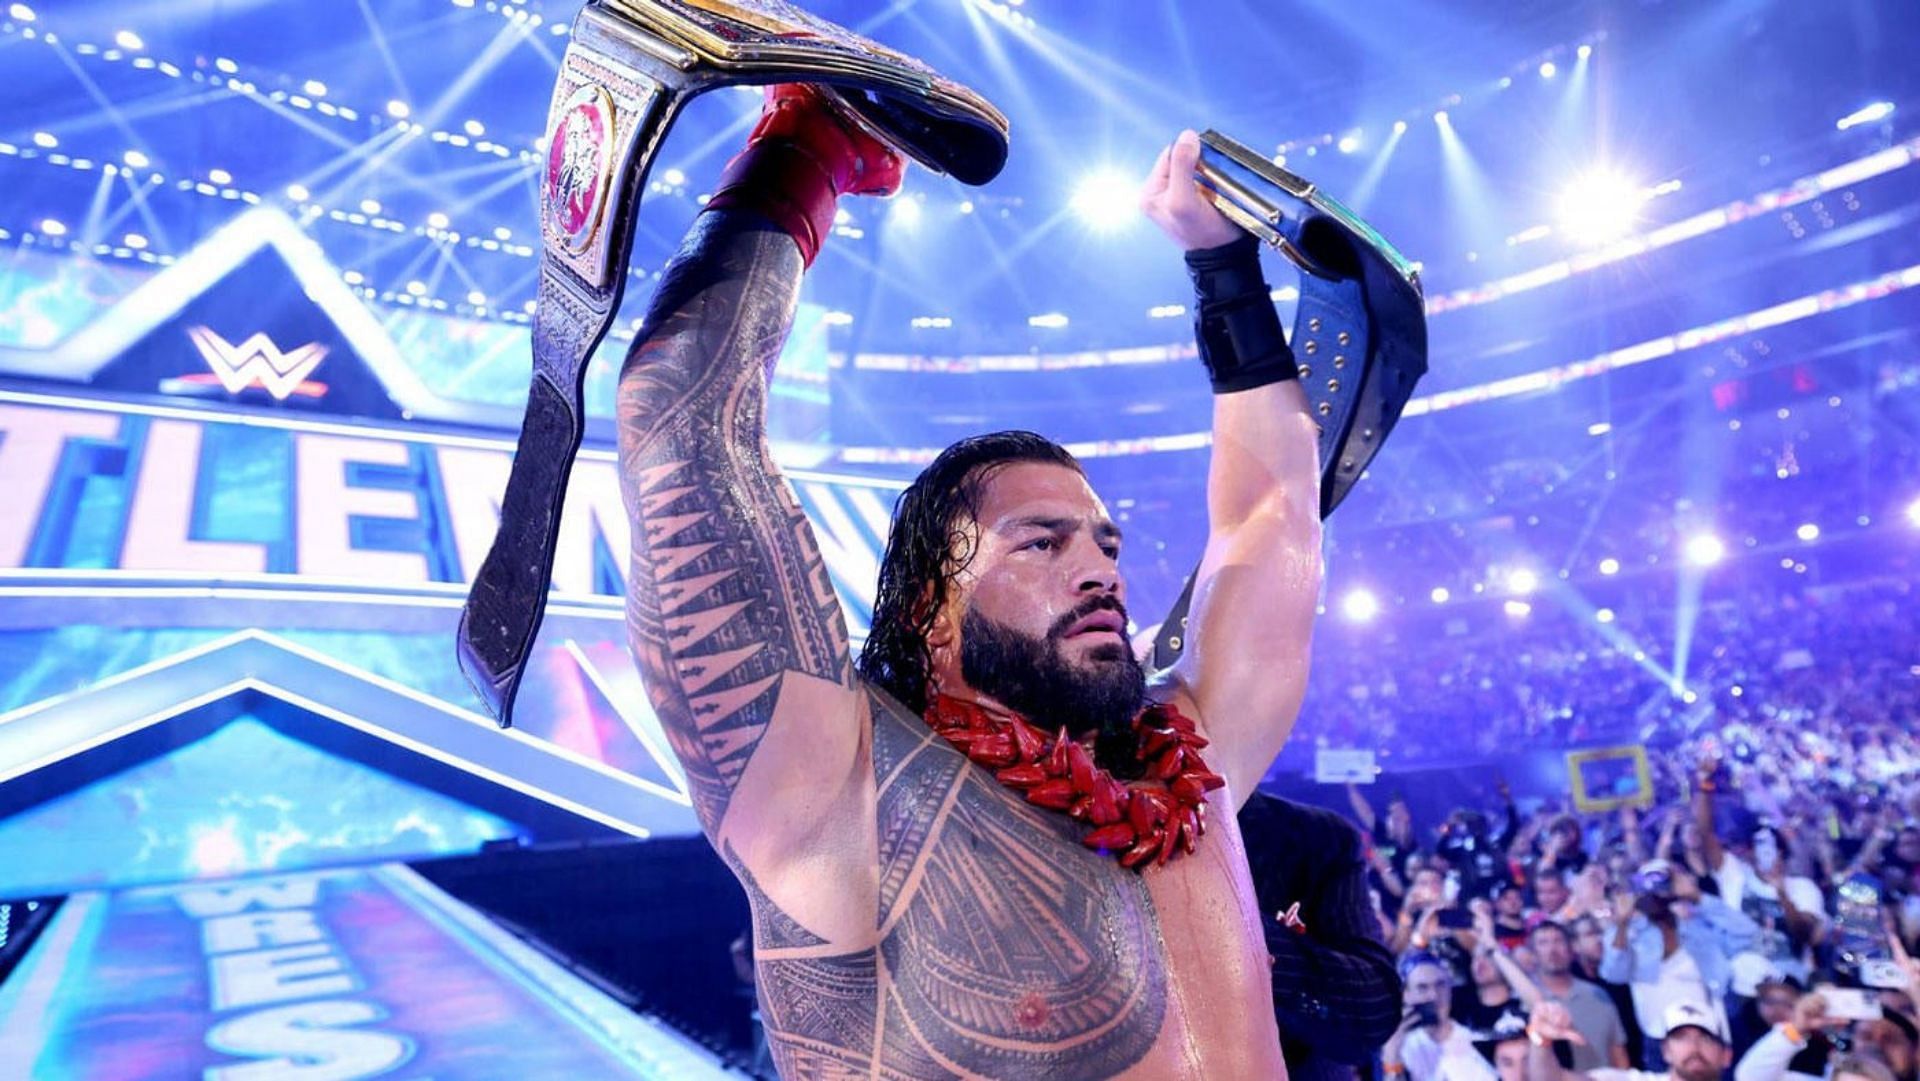 Roman Reigns was the main event on night 2 of WrestleMania 38.